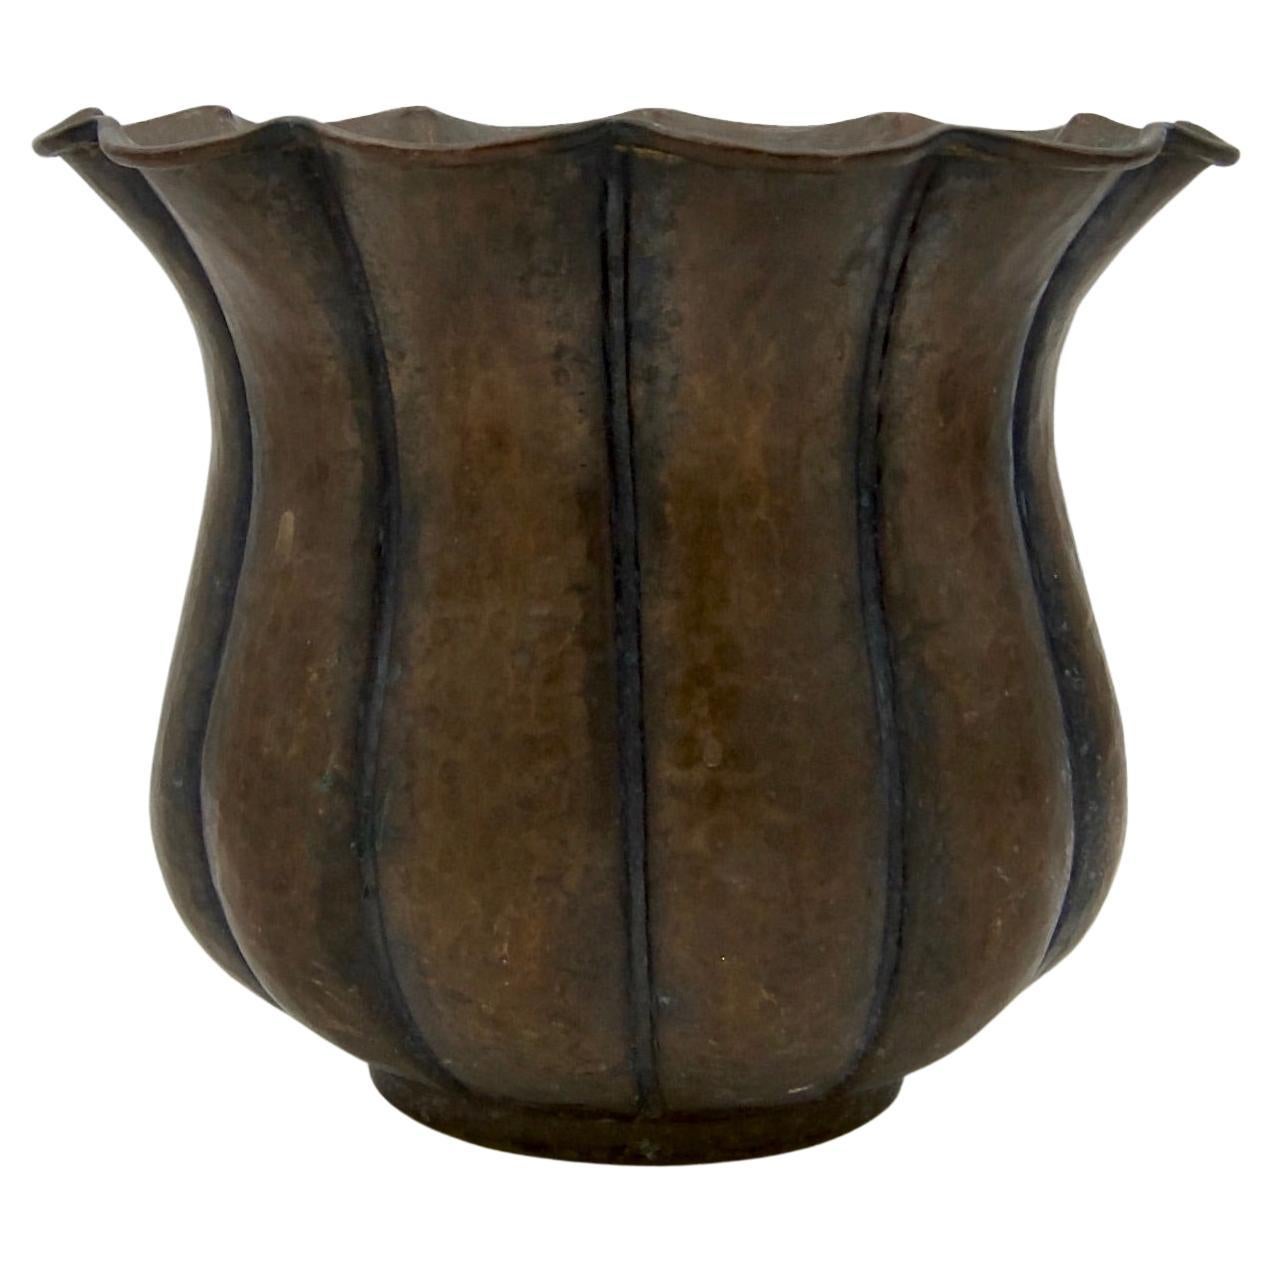 An antique hammered copper planter or cachepot in the Arts and Crafts style. The planter dates to the early 20th century and was hand-raised showing Hammer marks overall. The fluted body rests on a circular foot; the body swells outward before